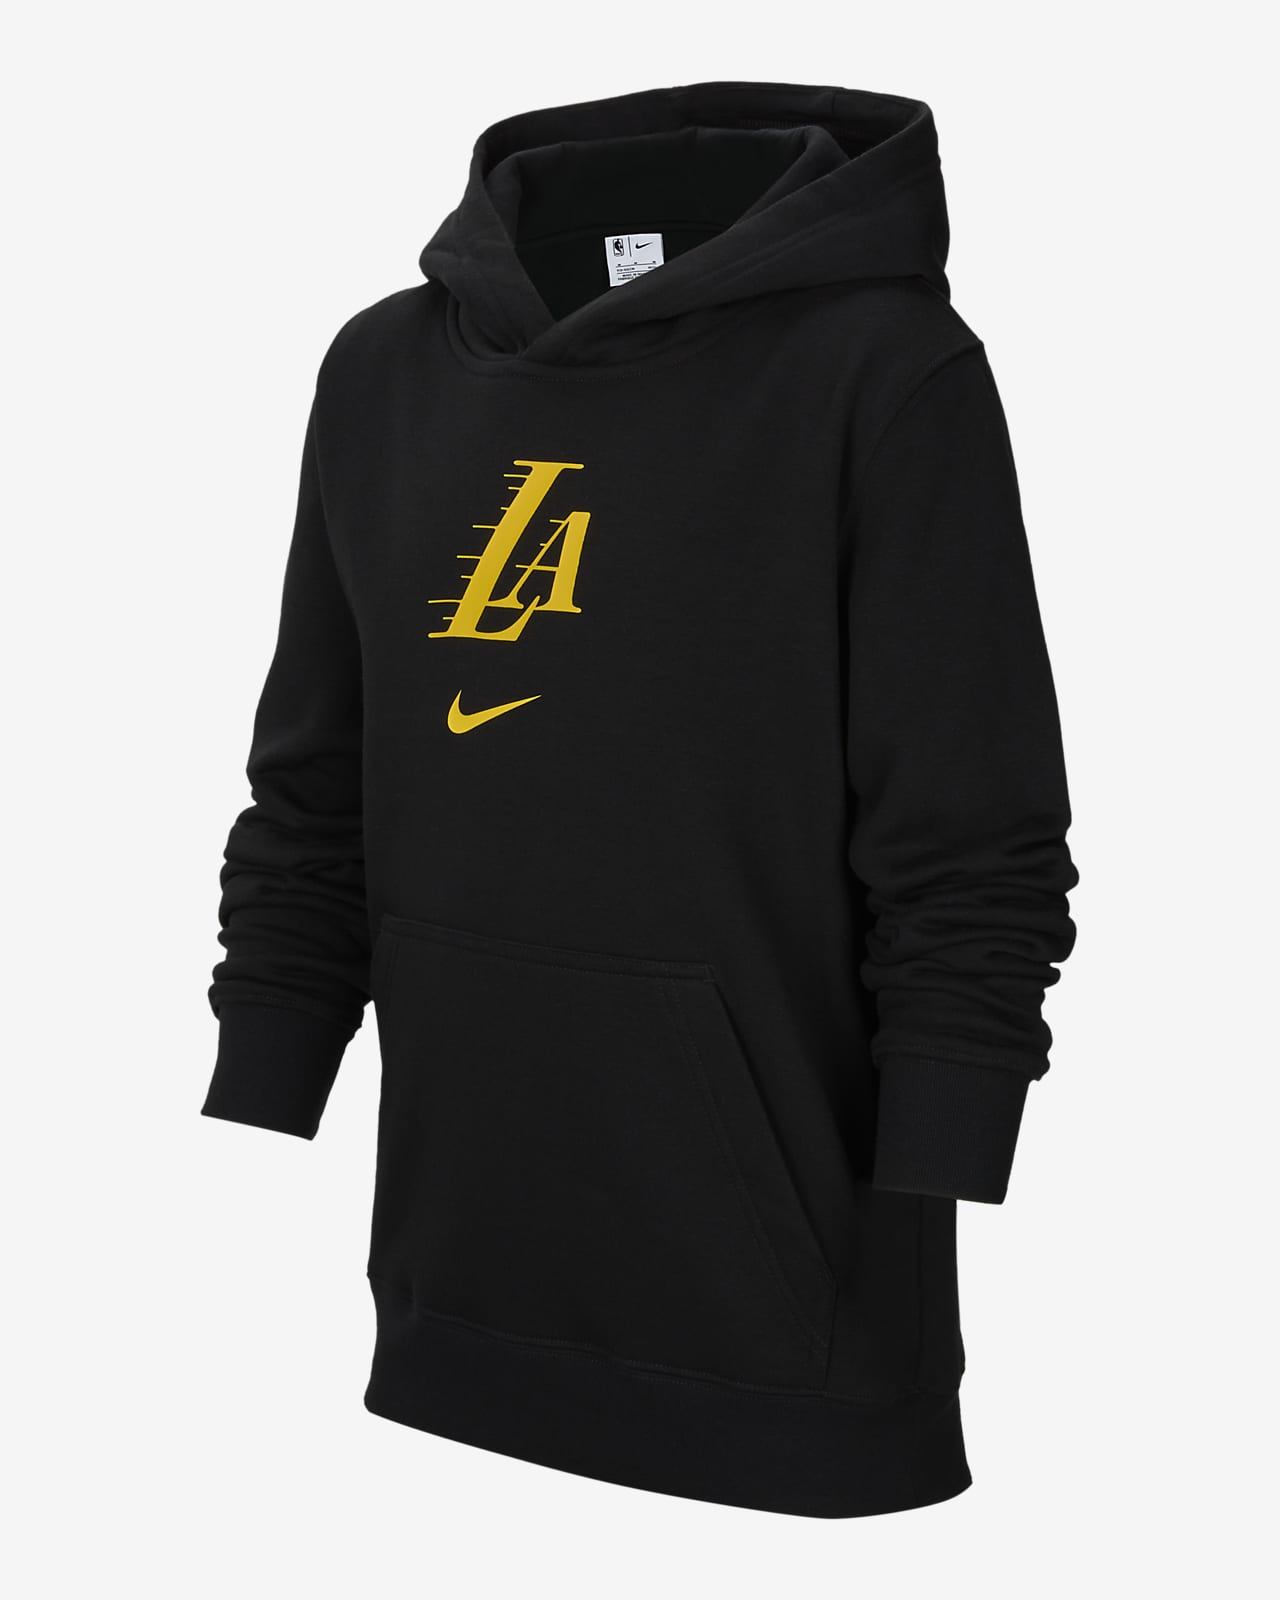 Los Angeles Lakers Club City Edition Toddler Nike NBA Pullover Hoodie